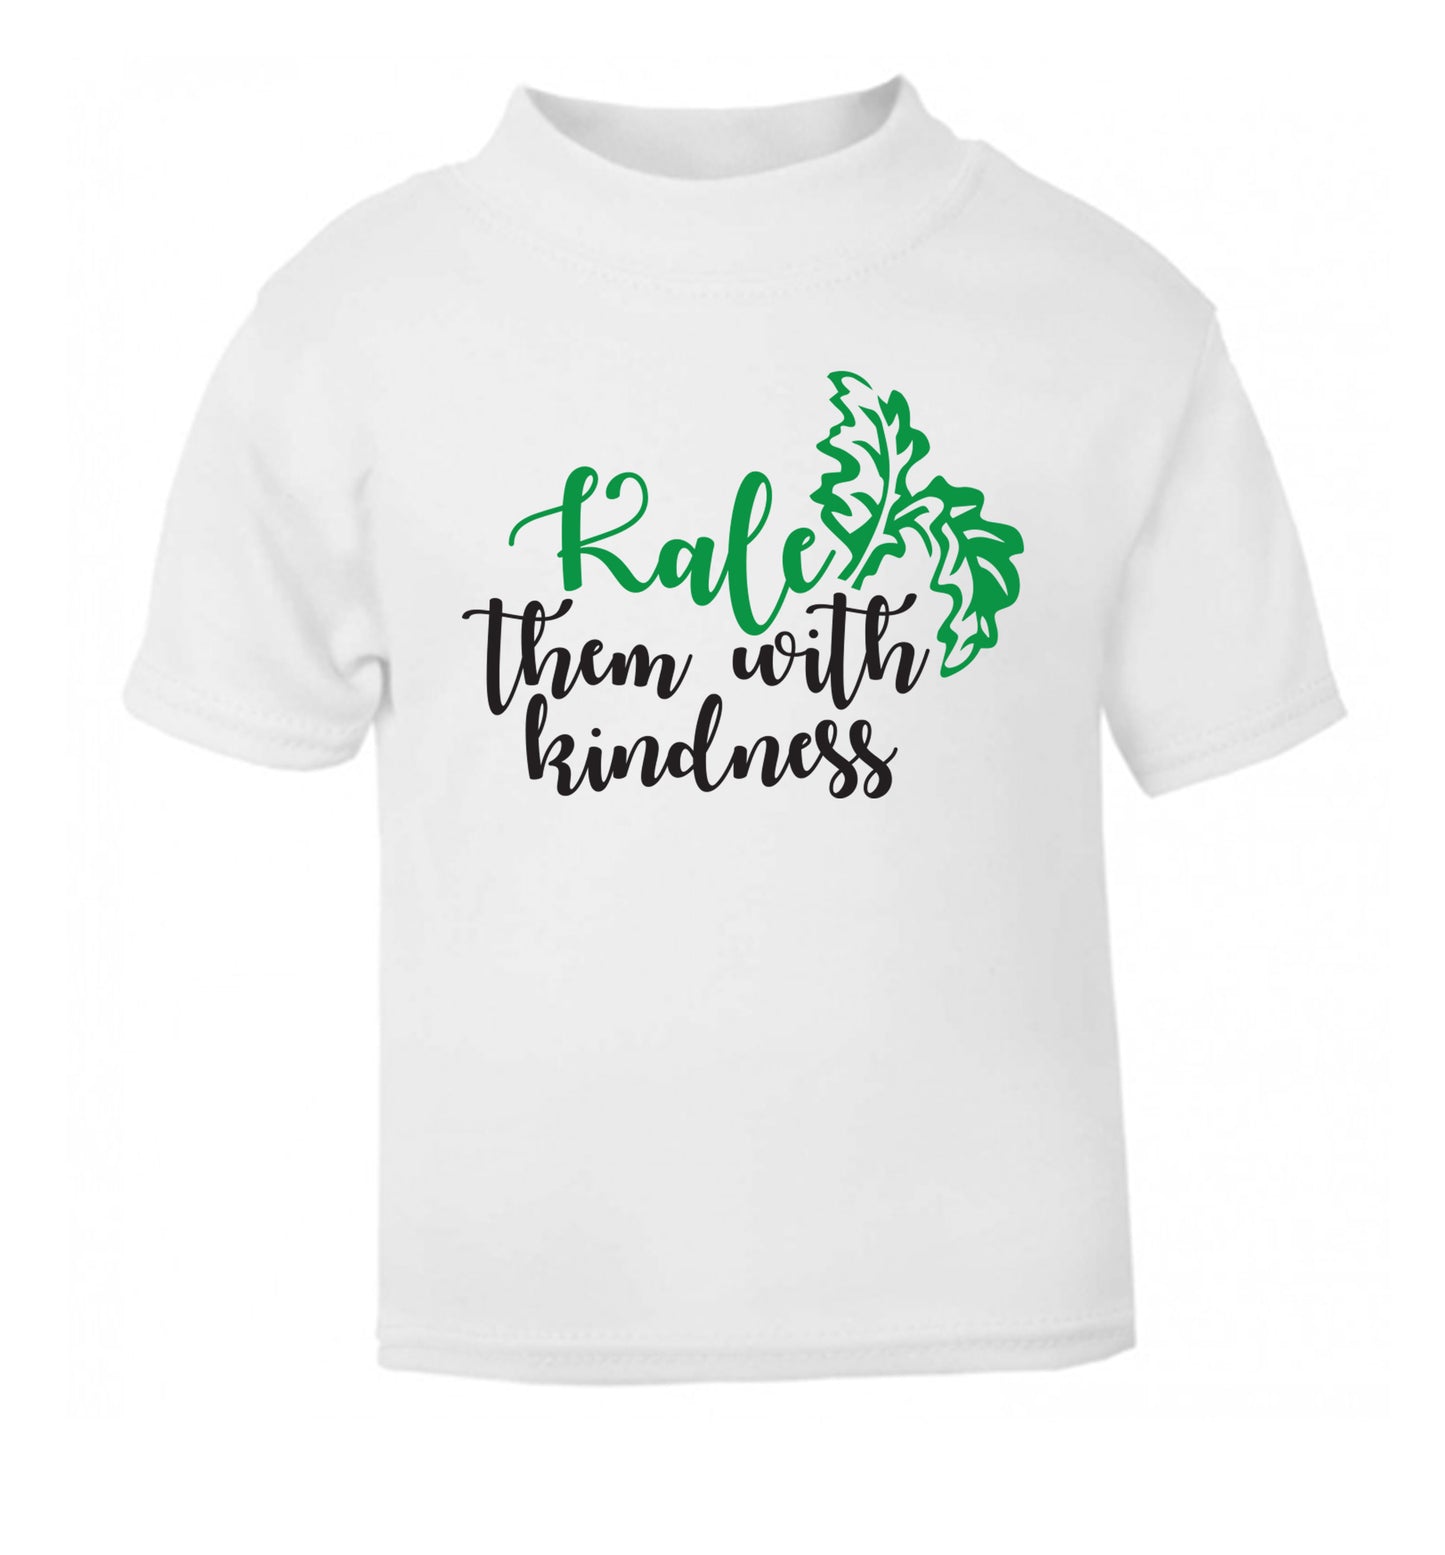 Kale them with kindness white Baby Toddler Tshirt 2 Years